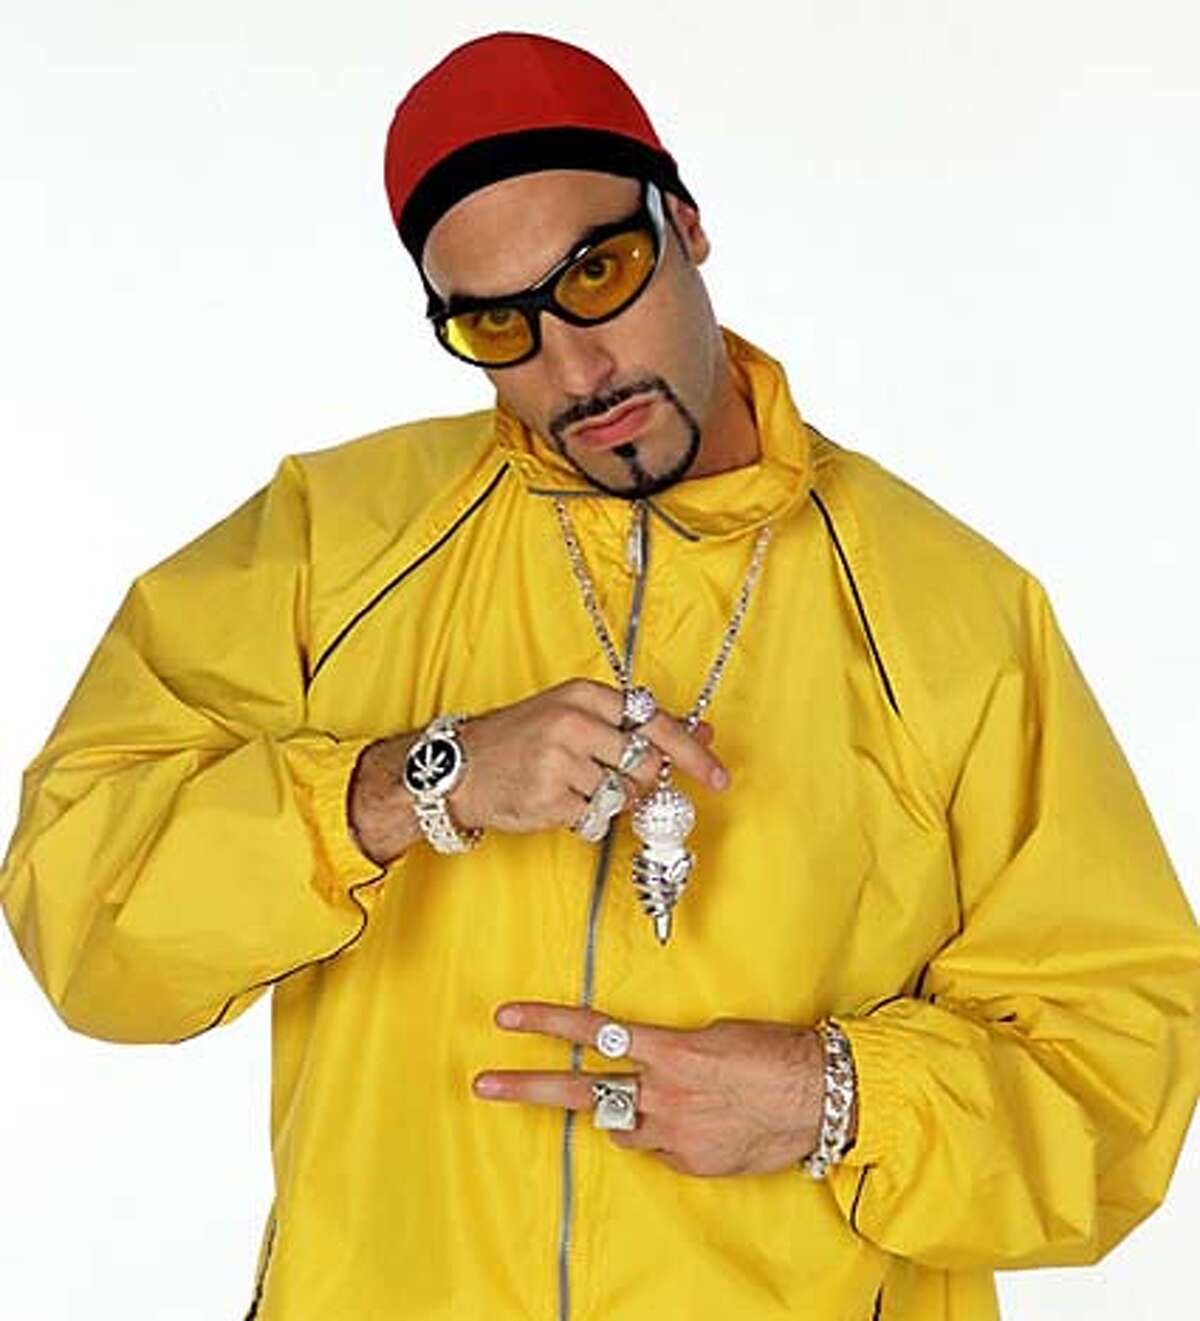 (NYT17) UNDATED -- Feb. 20, 2003 -- TV-ALI-G-REVIEW-2 -- "Da Ali G Show," which begins Friday night, Feb 21 on HBO, is irresistibly, corrosively funny. Ali G is the stage name of Sacha Baron Cohen, a British comedian who is famous in England as his comic persona, a white gangsta rapper wannabe who speaks a strangled argot of cockney, Jamaican and hip-hop slang. The British comedian Sacha Baron Cohen in costume and character as Ali G. (Oliver Upton/HBO/The New York Times) *ONLY FOR USE WITH STORY BY ALESSANDRA STANLEY SLUGGED: TV-ALI-G-REVIEW. ALL OTHER USE PROHIBITED. CAT XNYZ, HFO, *ONLY FOR USE WITH STORY BY ALESSANDRA STANLEY SLUGGED: TV-ALI-G-REVIEW. ALL OTHER USE PROHIBITED.